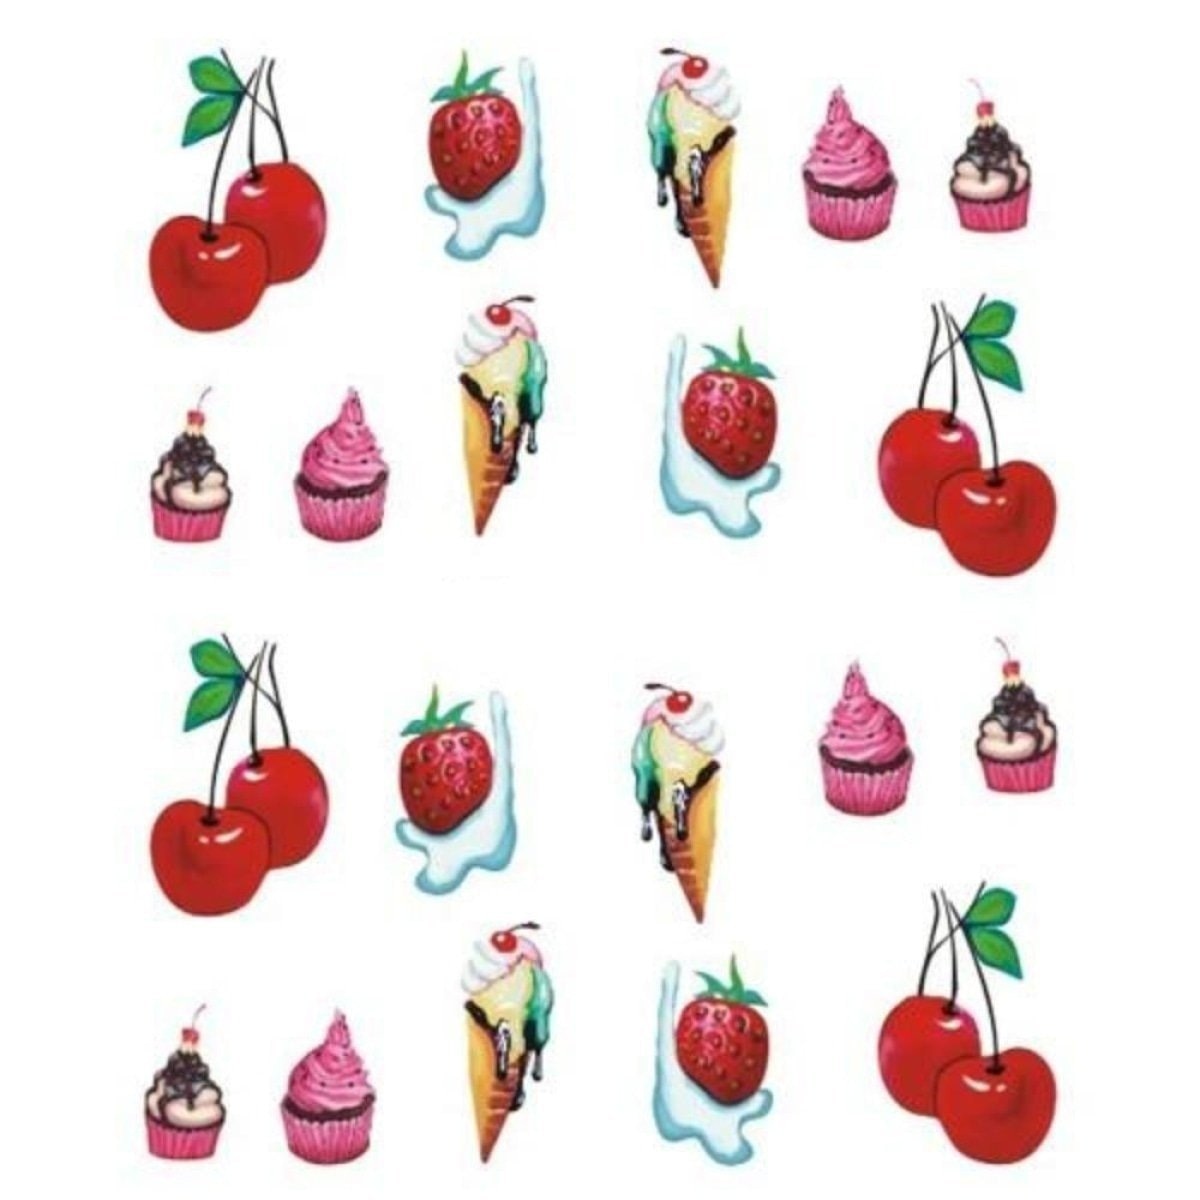 Strawberry Summer Cake & Fruit Stickers For Nails Nail Manicure Art - Stz-496 Sheet